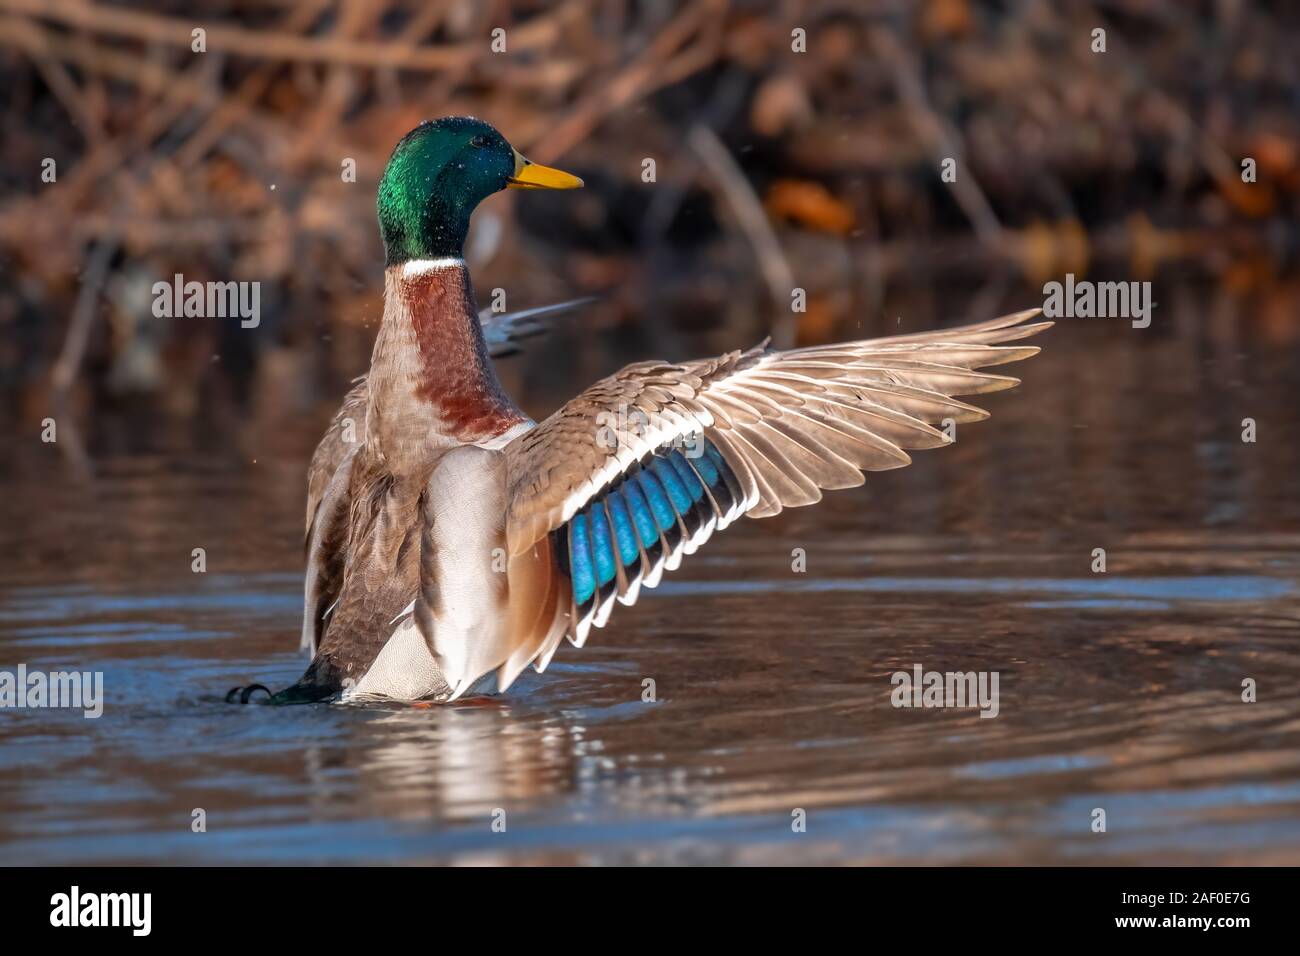 Birds and animals in wildlife. Beautiful duck flapping the wings in water of pond or river. Stock Photo